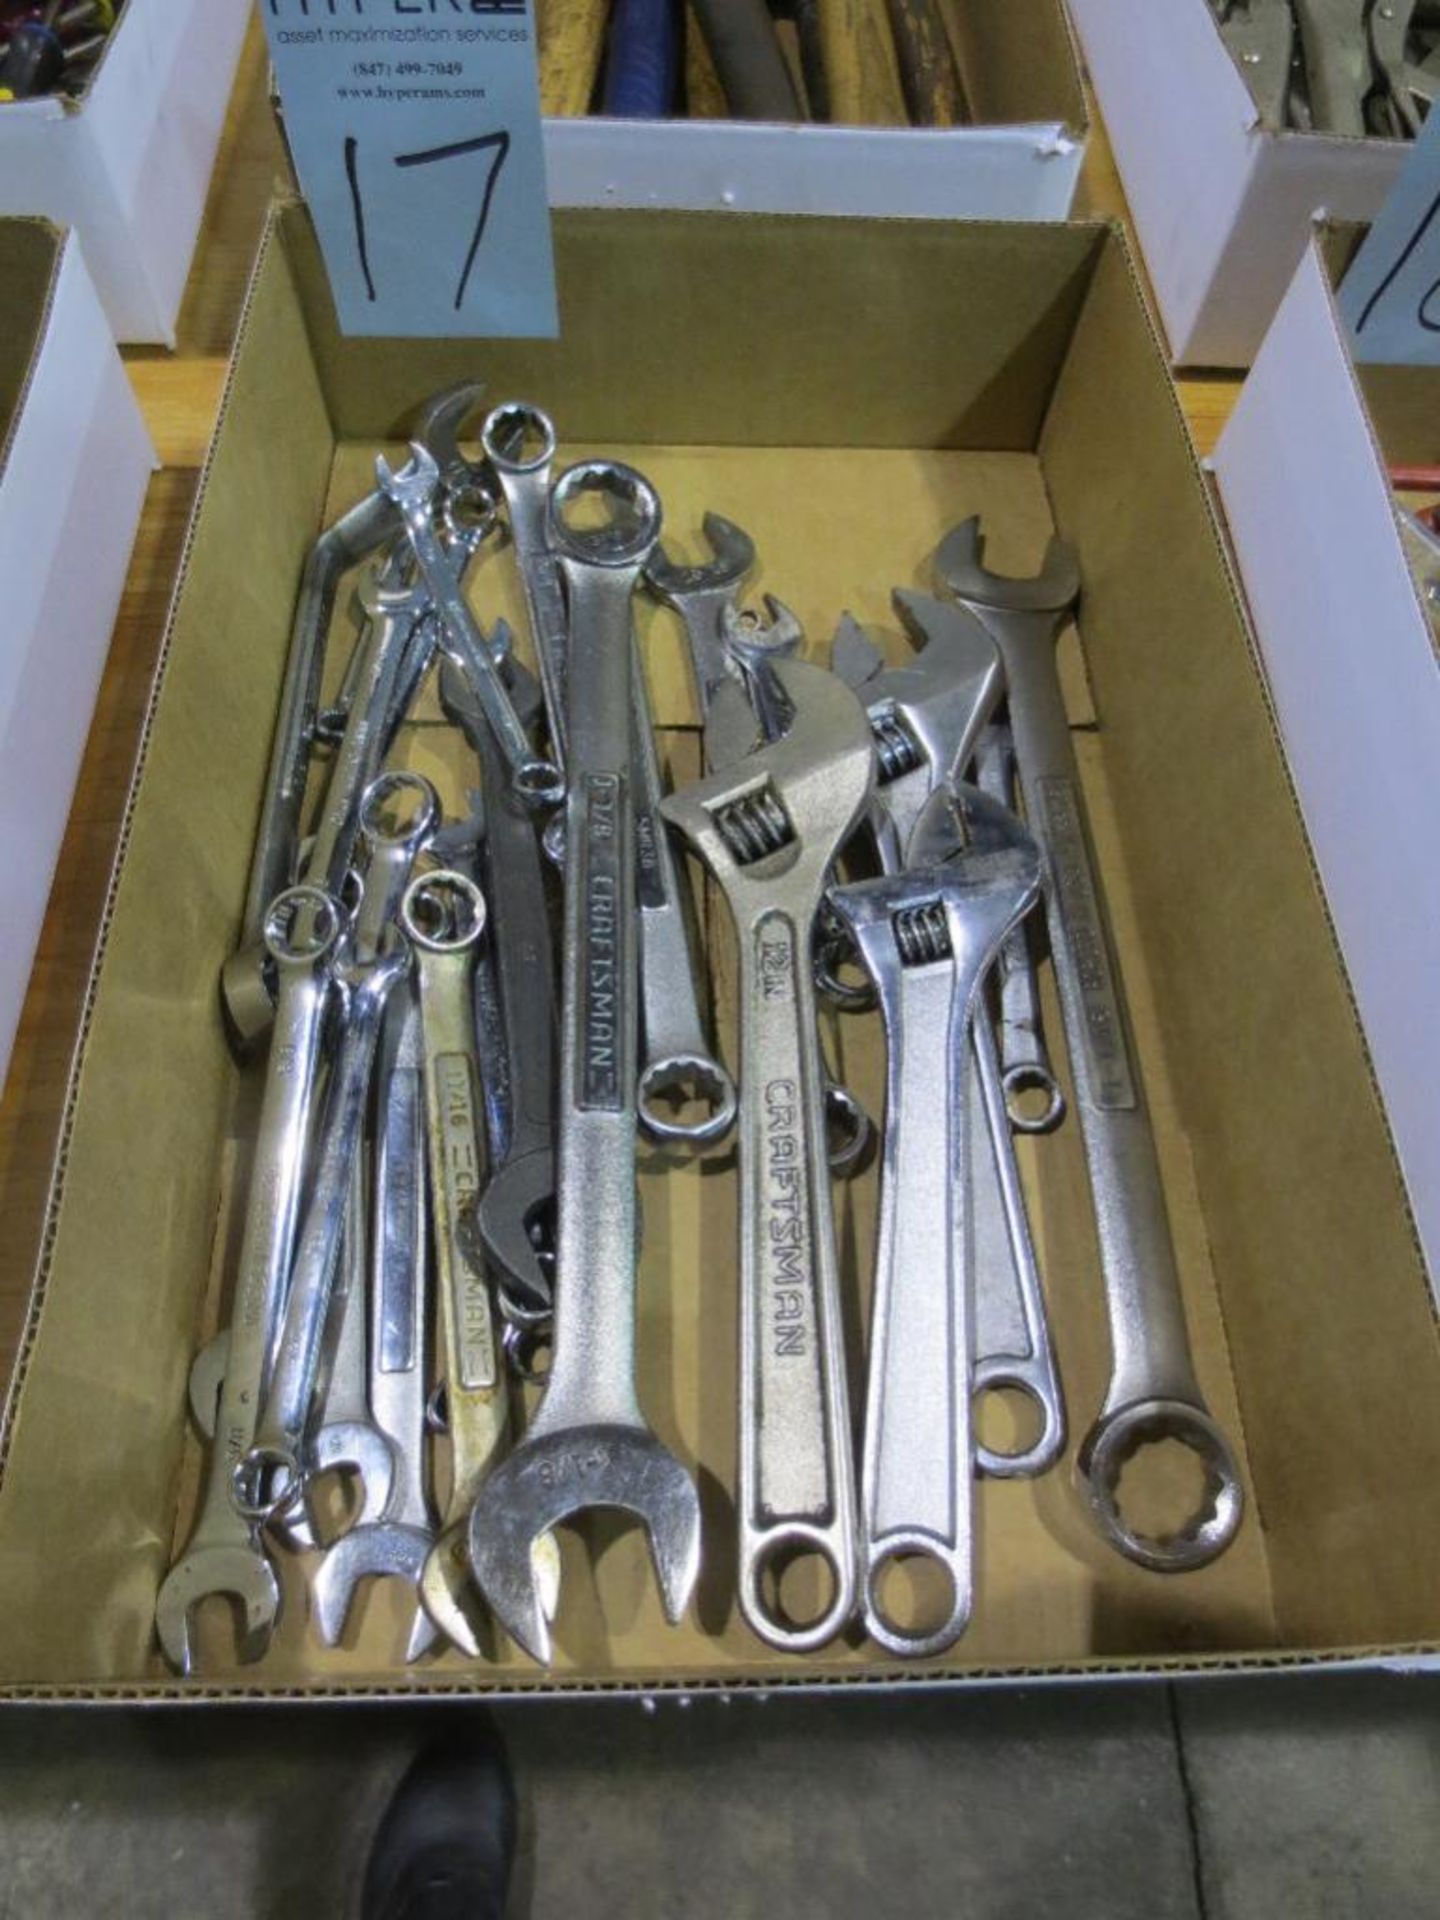 Assorted wrenches and adjustable wrenches